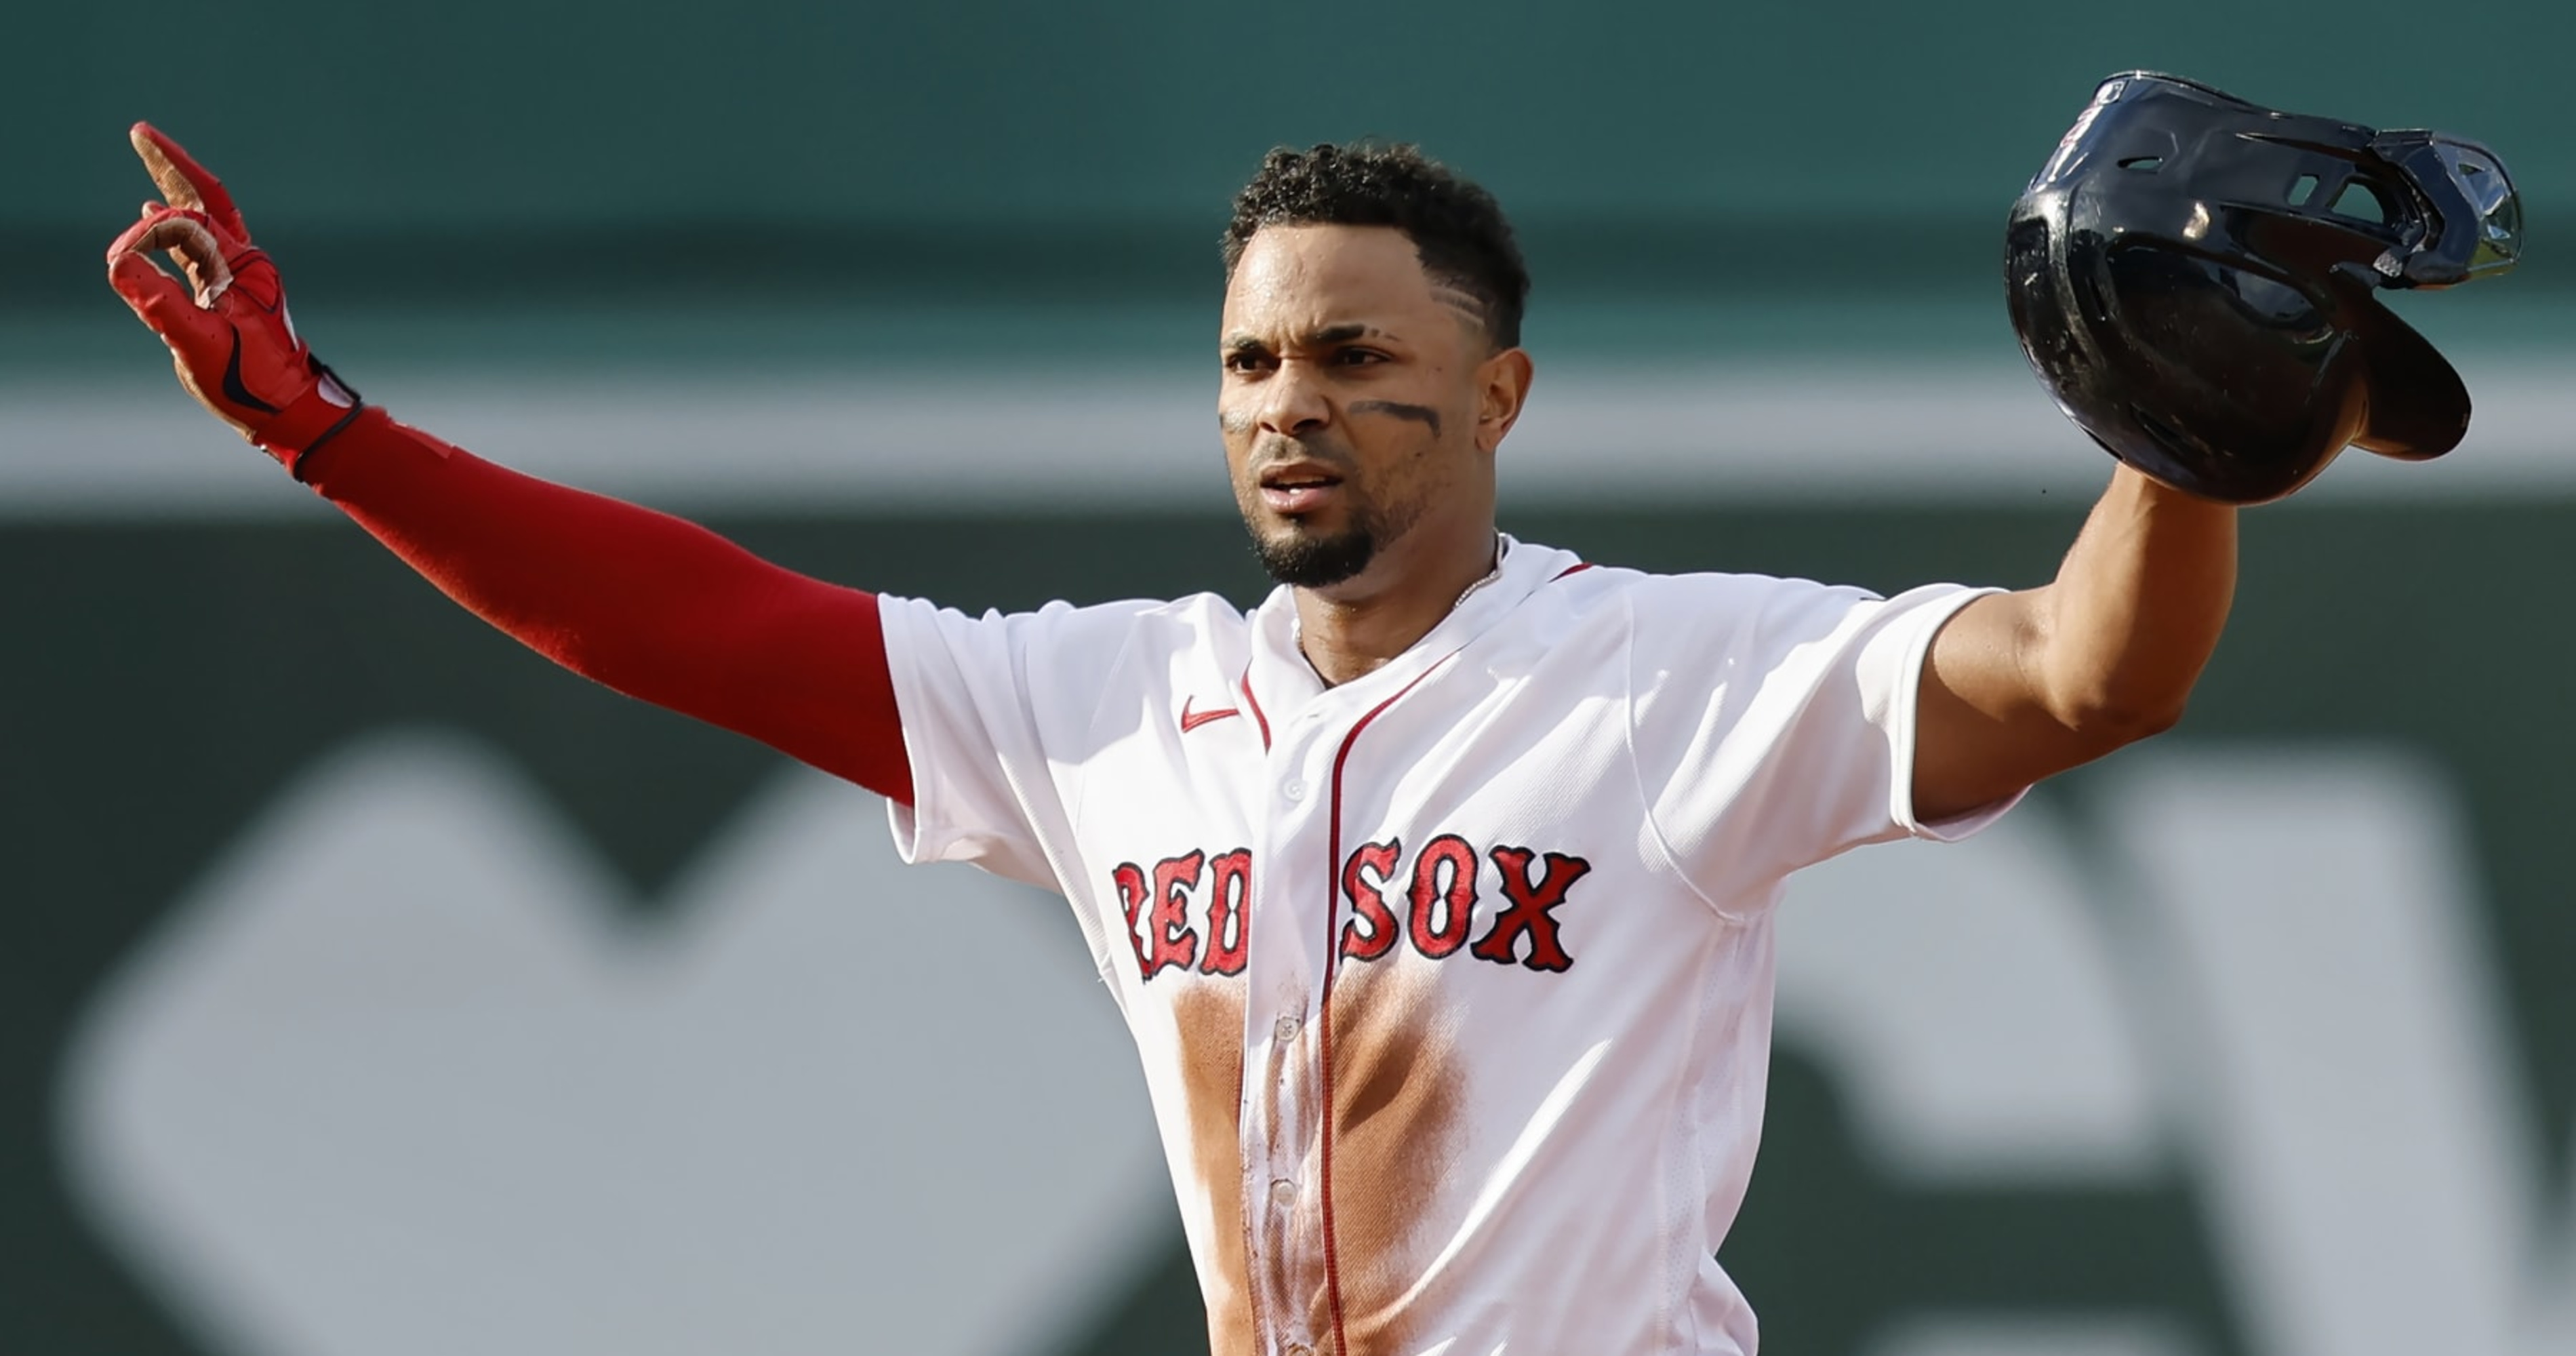 The Top 10 Landing Spots for Red Sox SS Xander Bogaerts in MLB Free